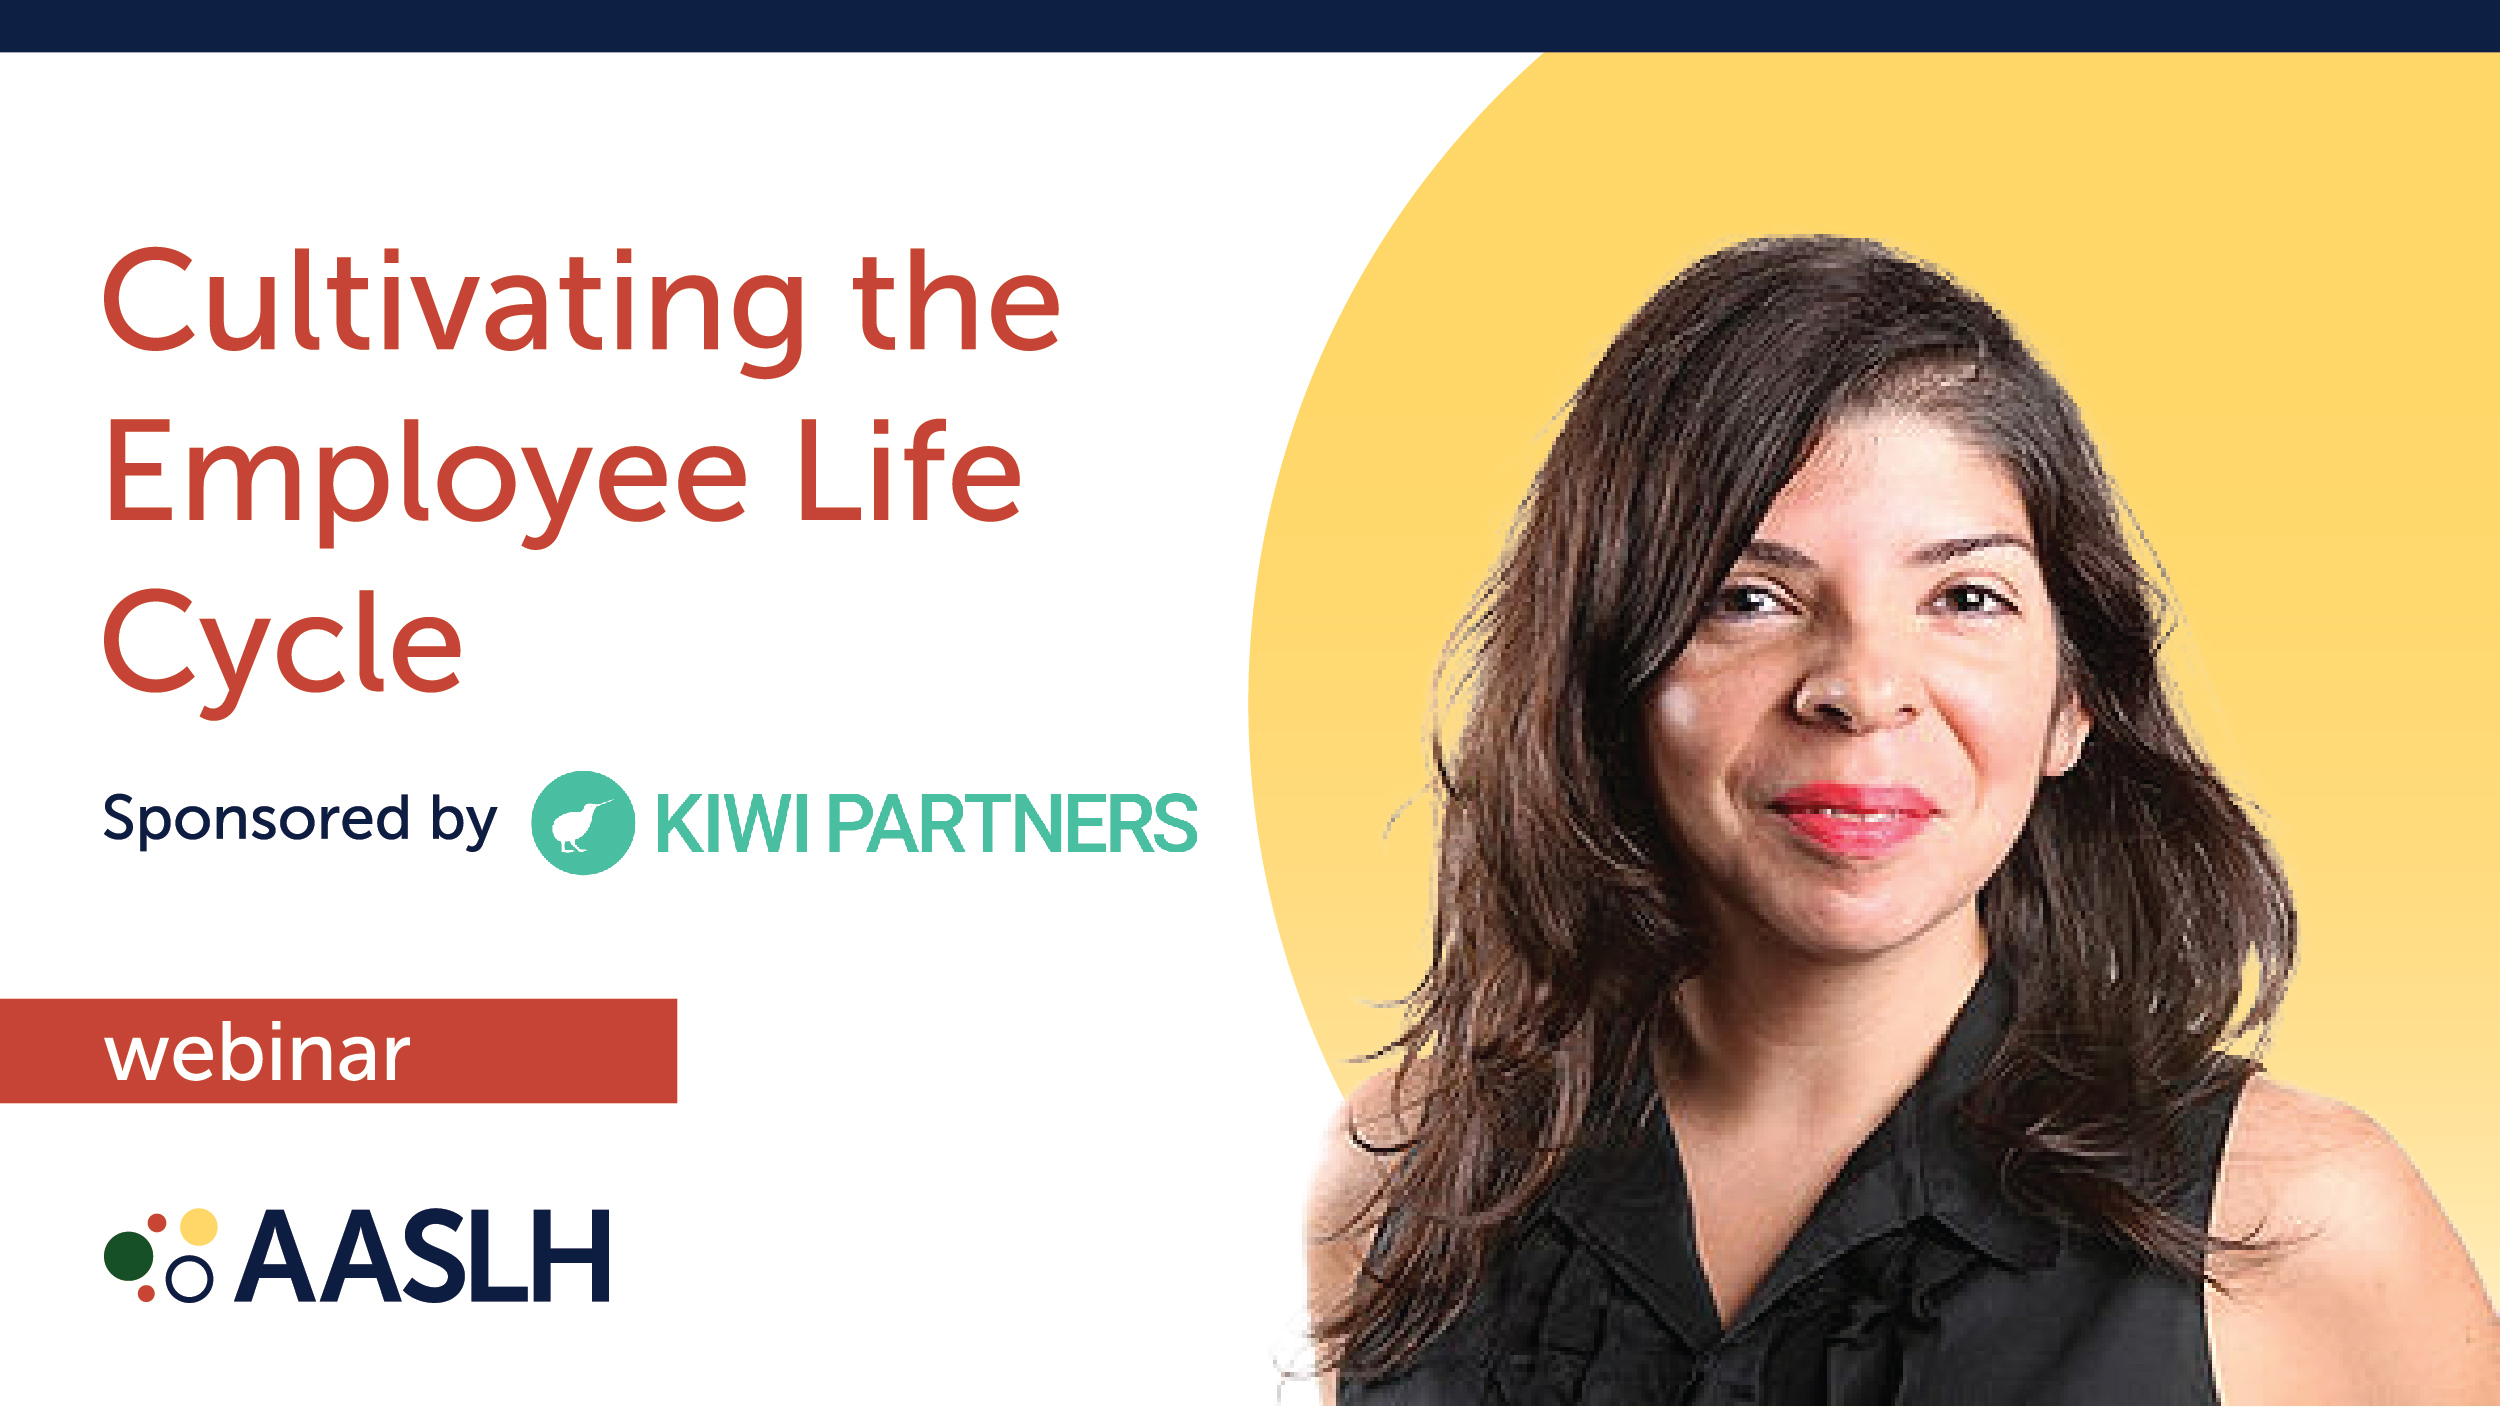 Recorded Webinar: Cultivating the Employee Life Cycle (Sponsored by Kiwi Partners)